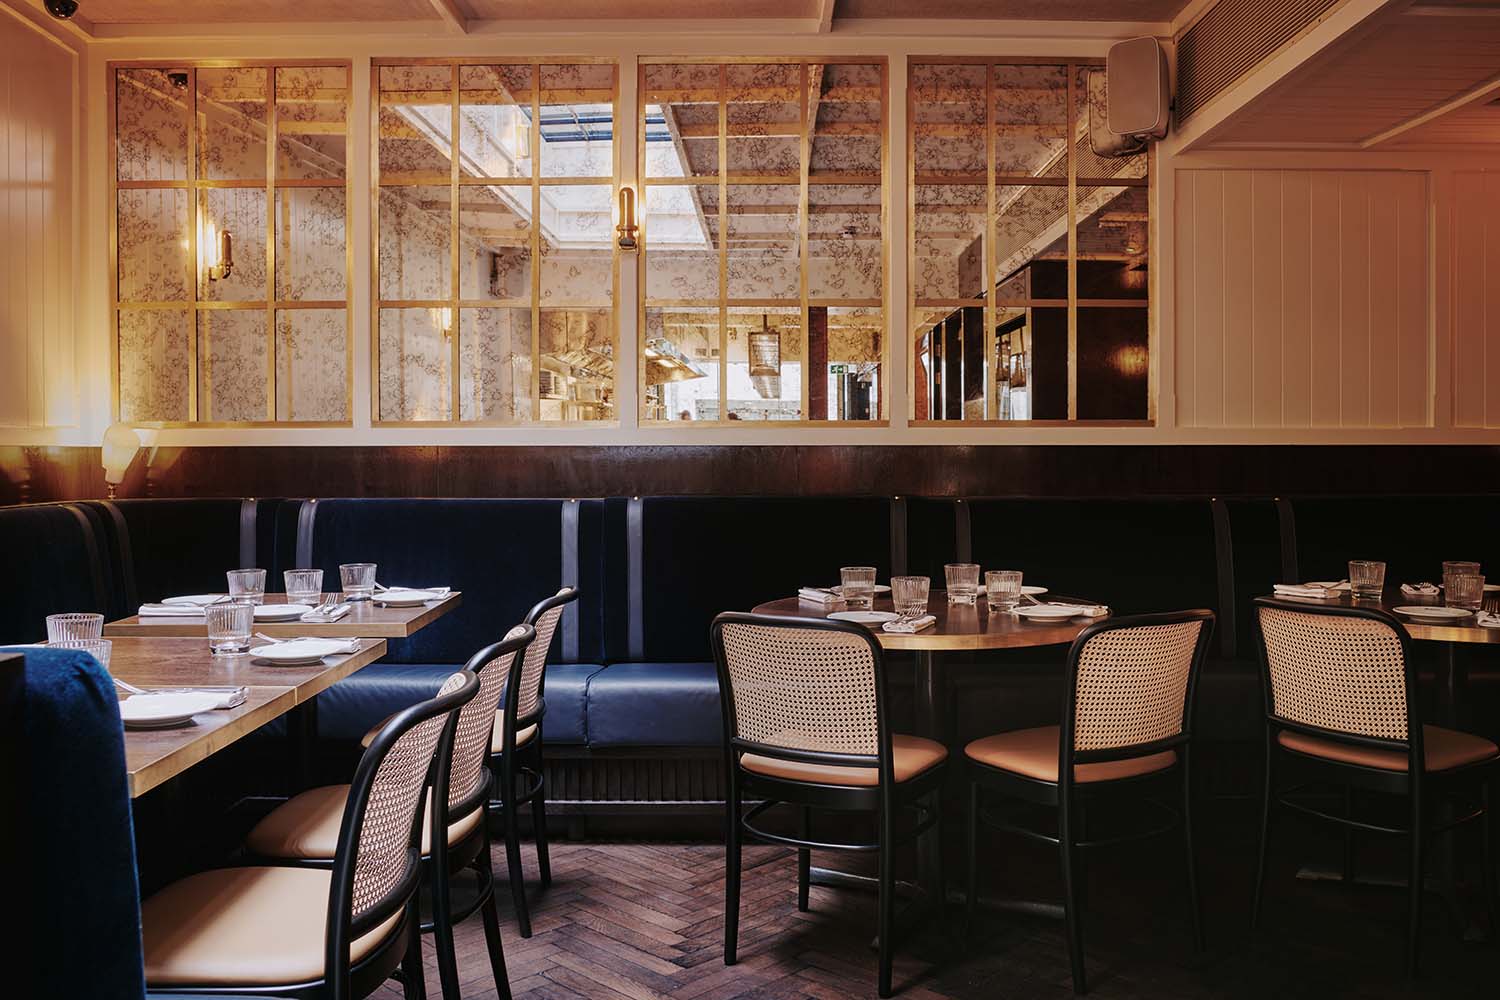 The Palomar Soho London Restaurant Redesigned by Archer Humphryes